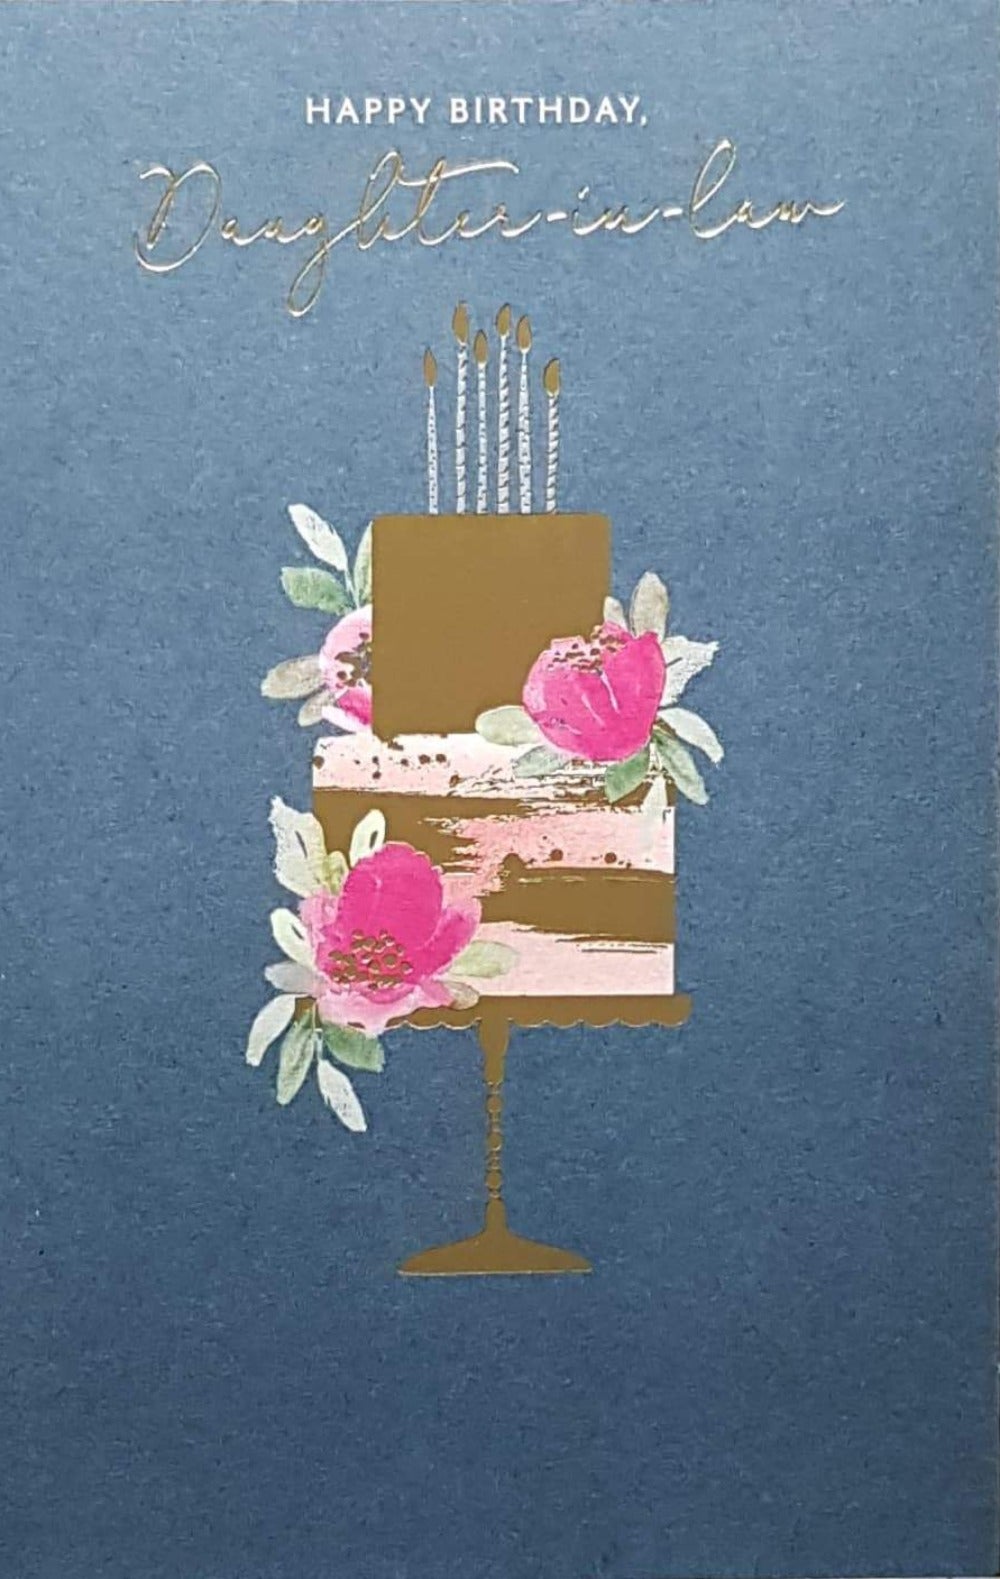 Birthday Card - Daughter In Law / Two Layer Cake And Flowers